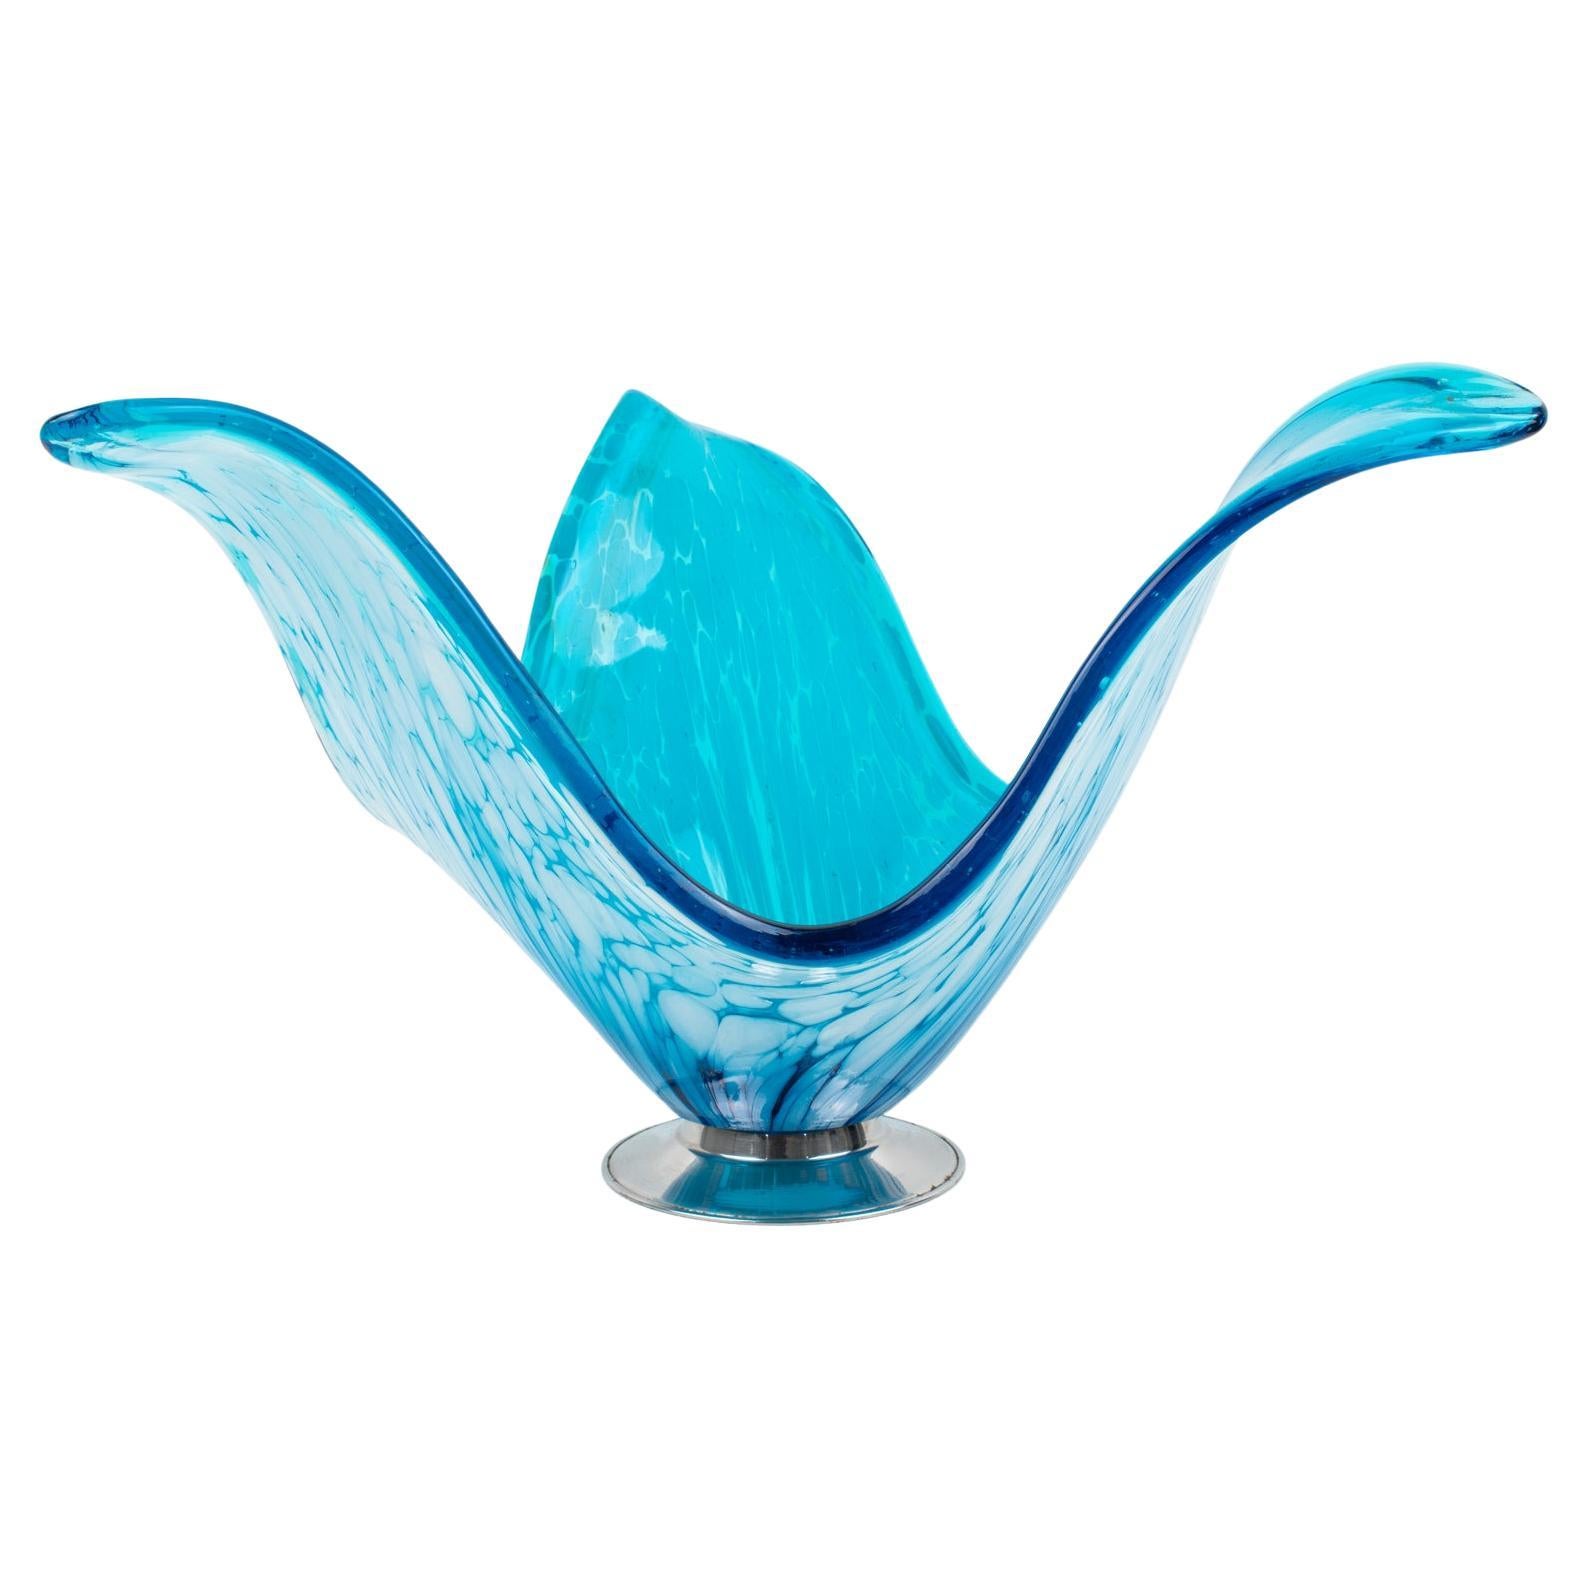 Italian Art Glass Murano Blue and White Sculptural Bowl Vase Centerpiece For Sale